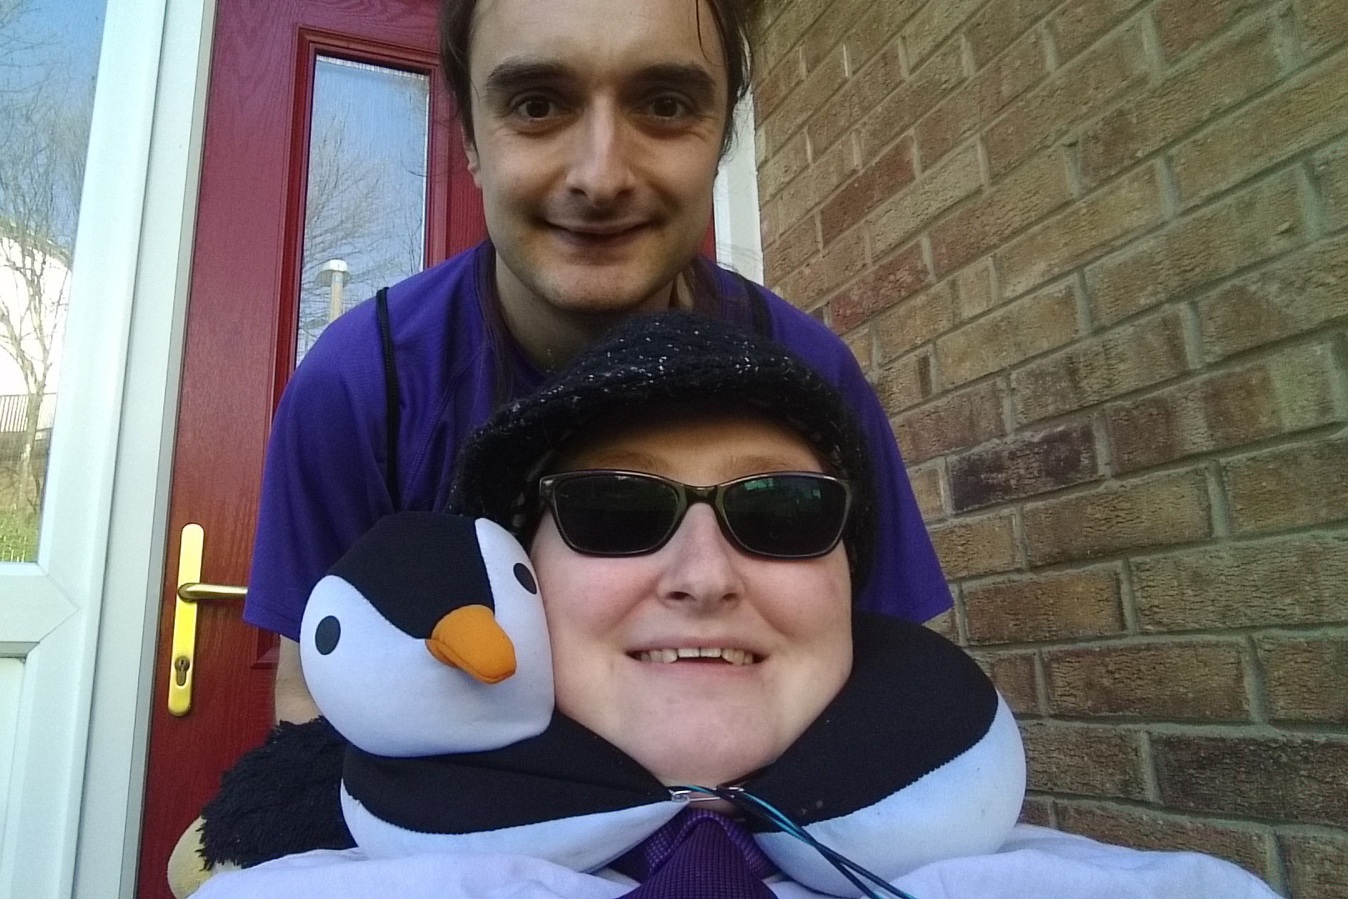 Danni is at the bottom of the image, wearing a shirt and tie, sunglasses and a hat. Above is Johan, who is wearing a purple t-shirt and is leaning down. They both are smiling and are outside. 